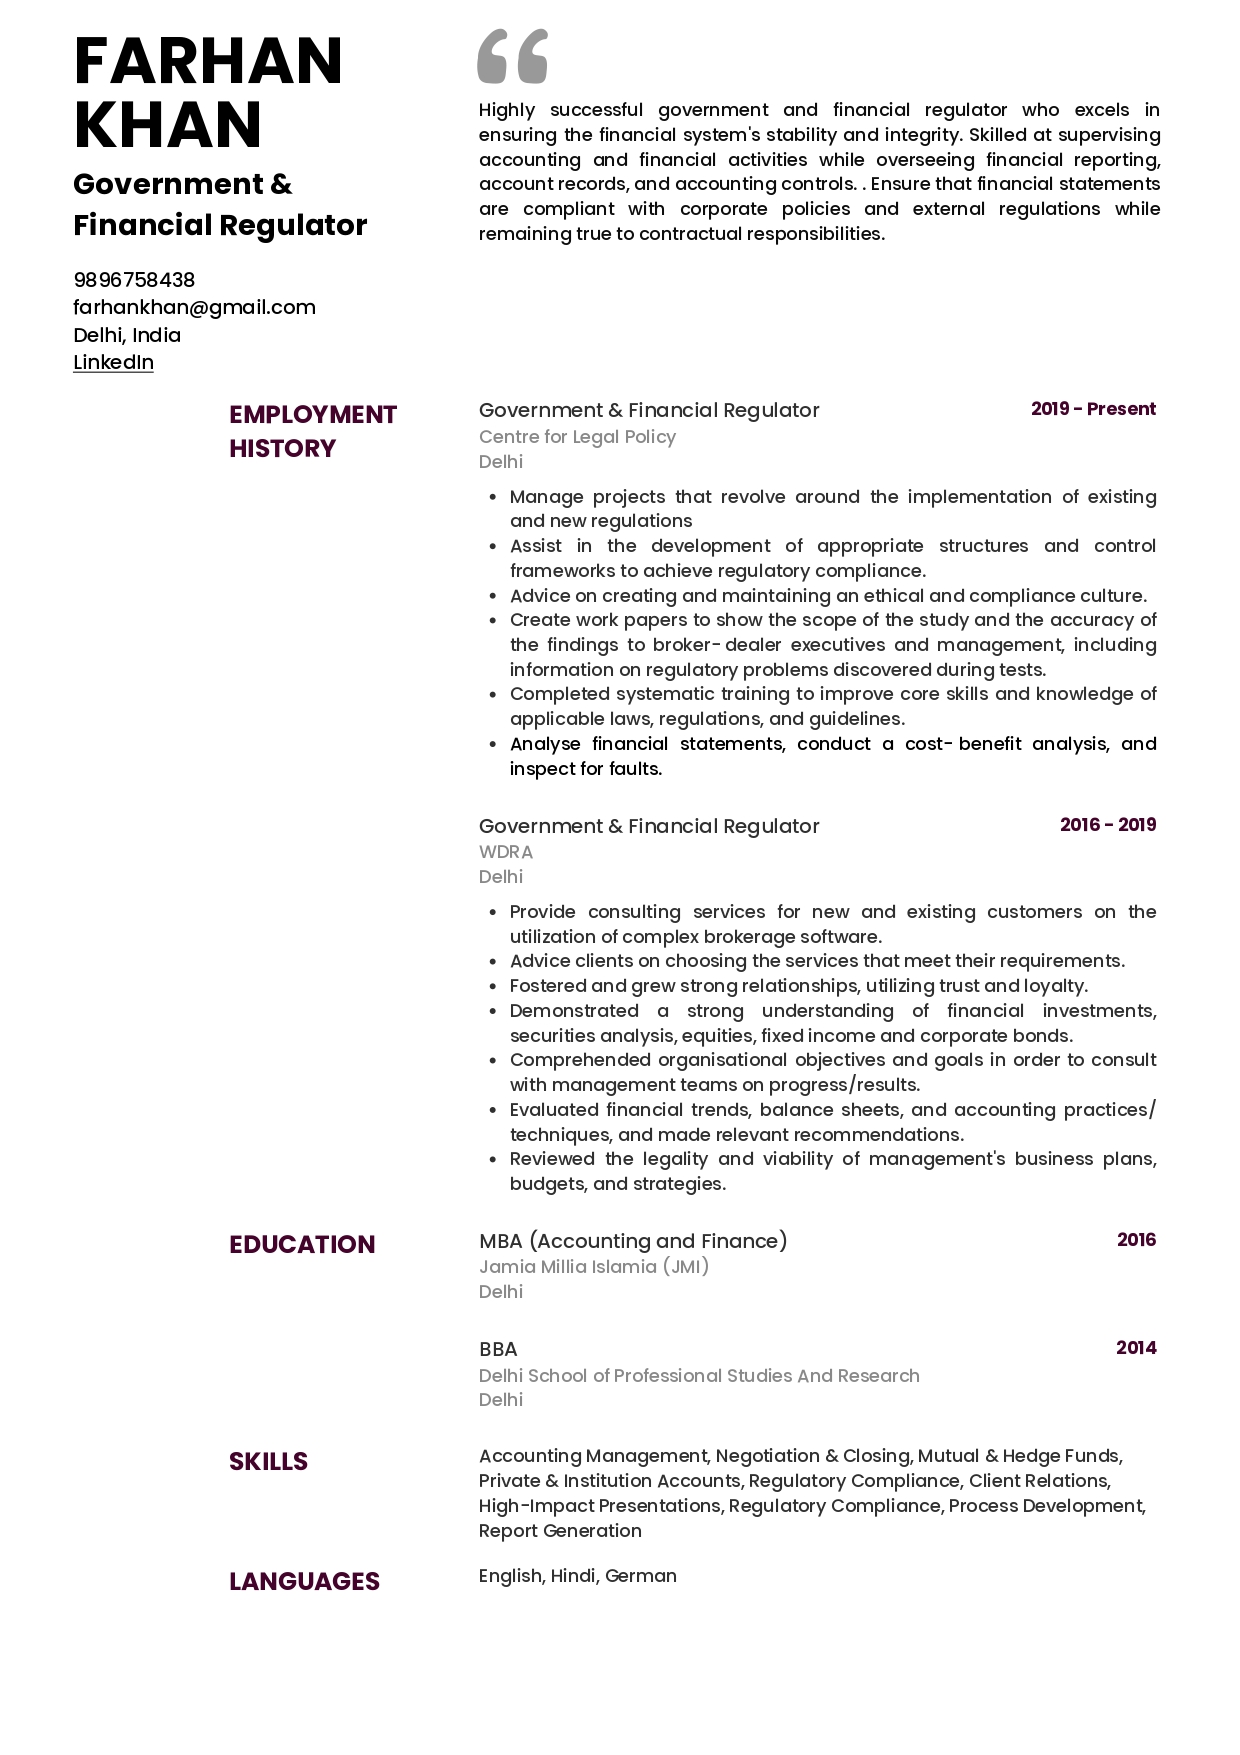 Sample Resume of Government and Financial Regulator | Free Resume Templates & Samples on Resumod.co